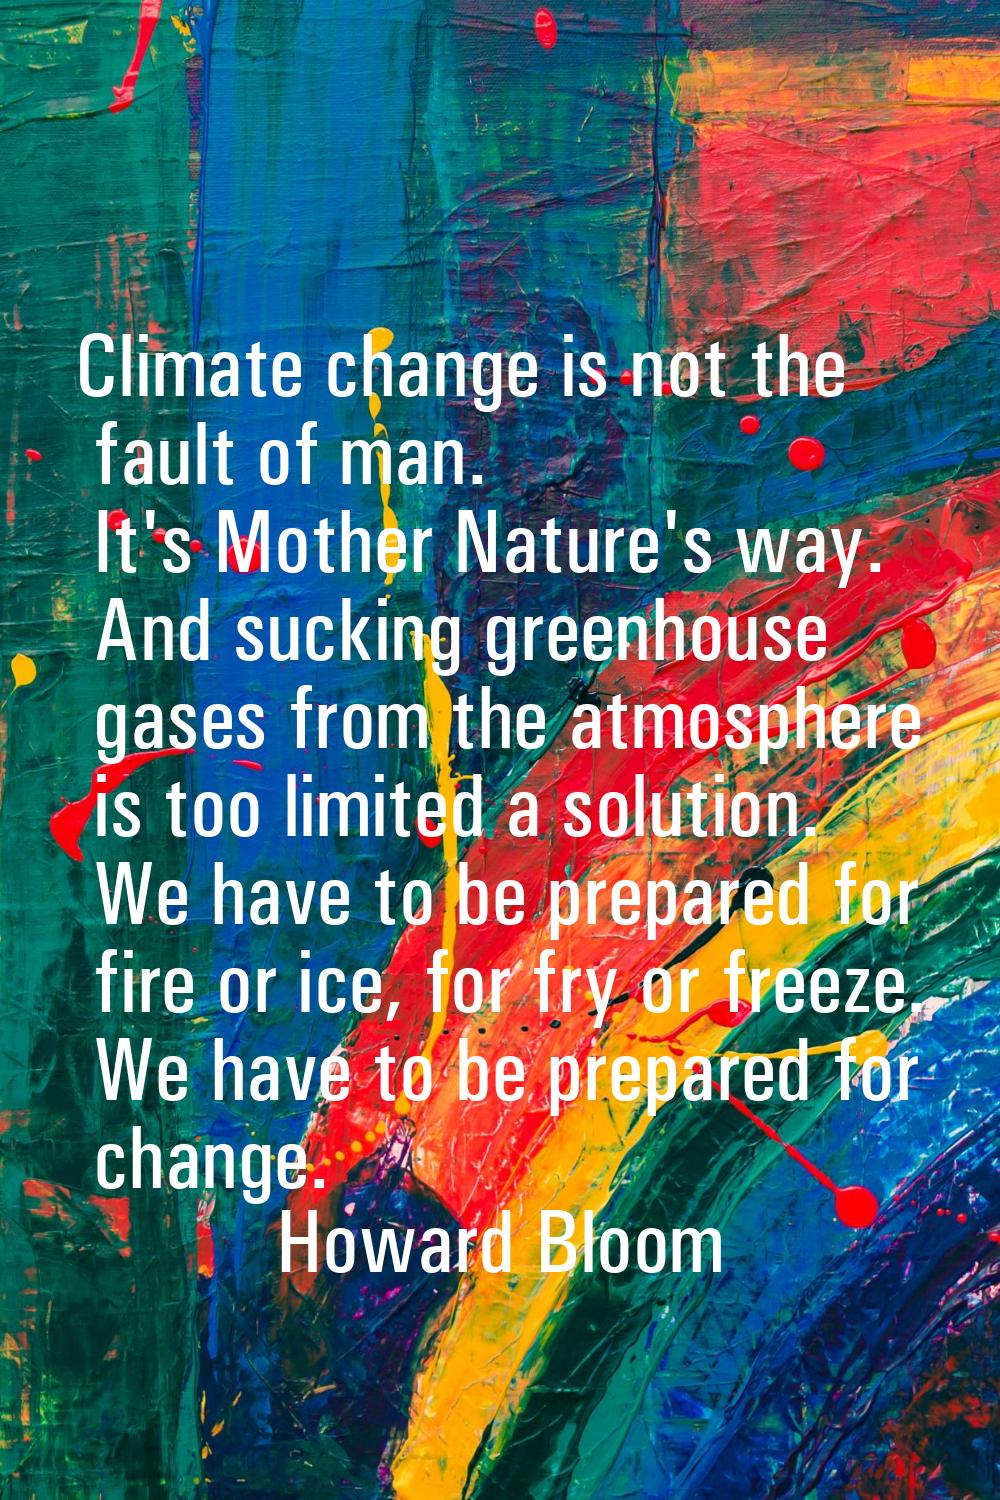 Climate change is not the fault of man. It's Mother Nature's way. And sucking greenhouse gases from